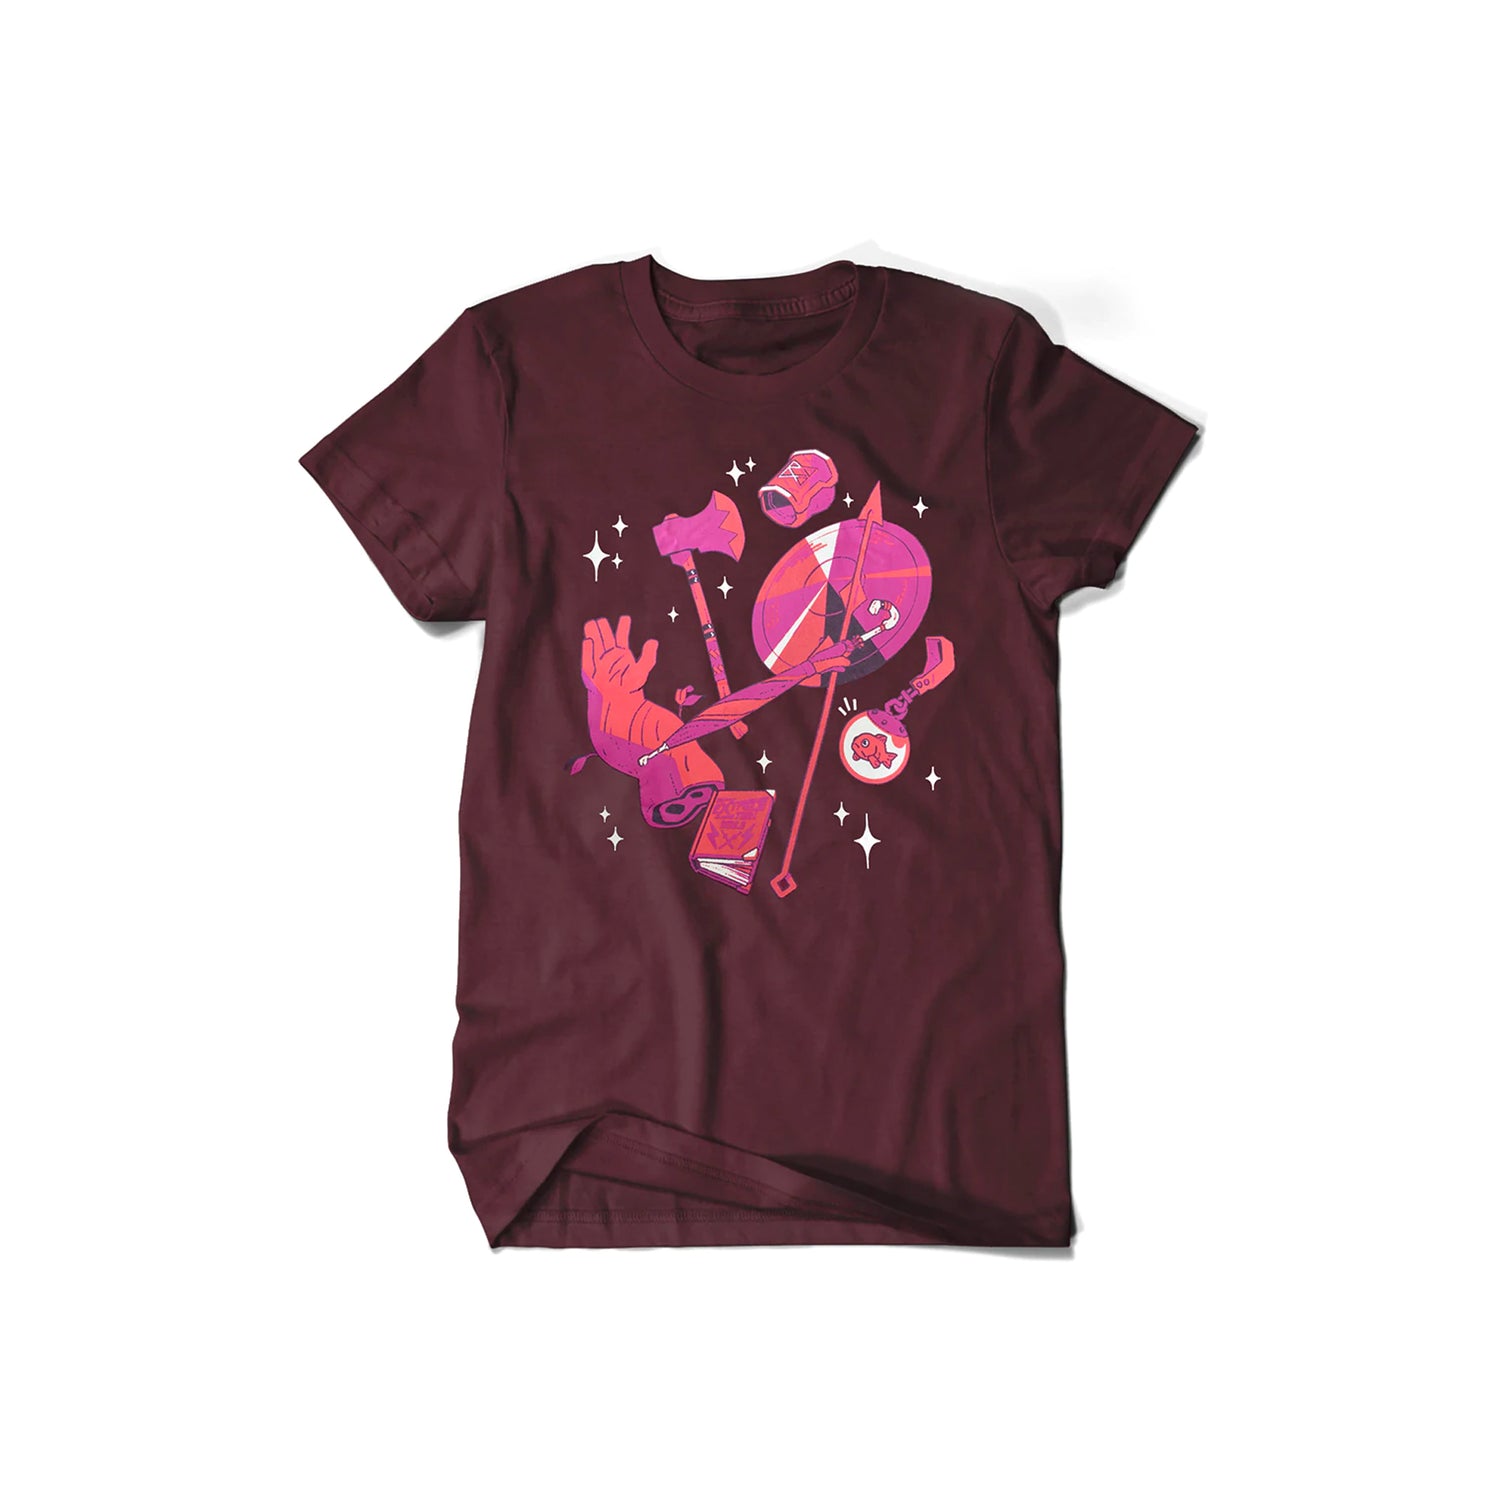 A maroon tee-shirt with pink and orange illustrations on it. There's a wooden arm, an ax, and umbrella, a bracer, a shield, a spear, a book, and a goldfish in a small glass attached to a strap.